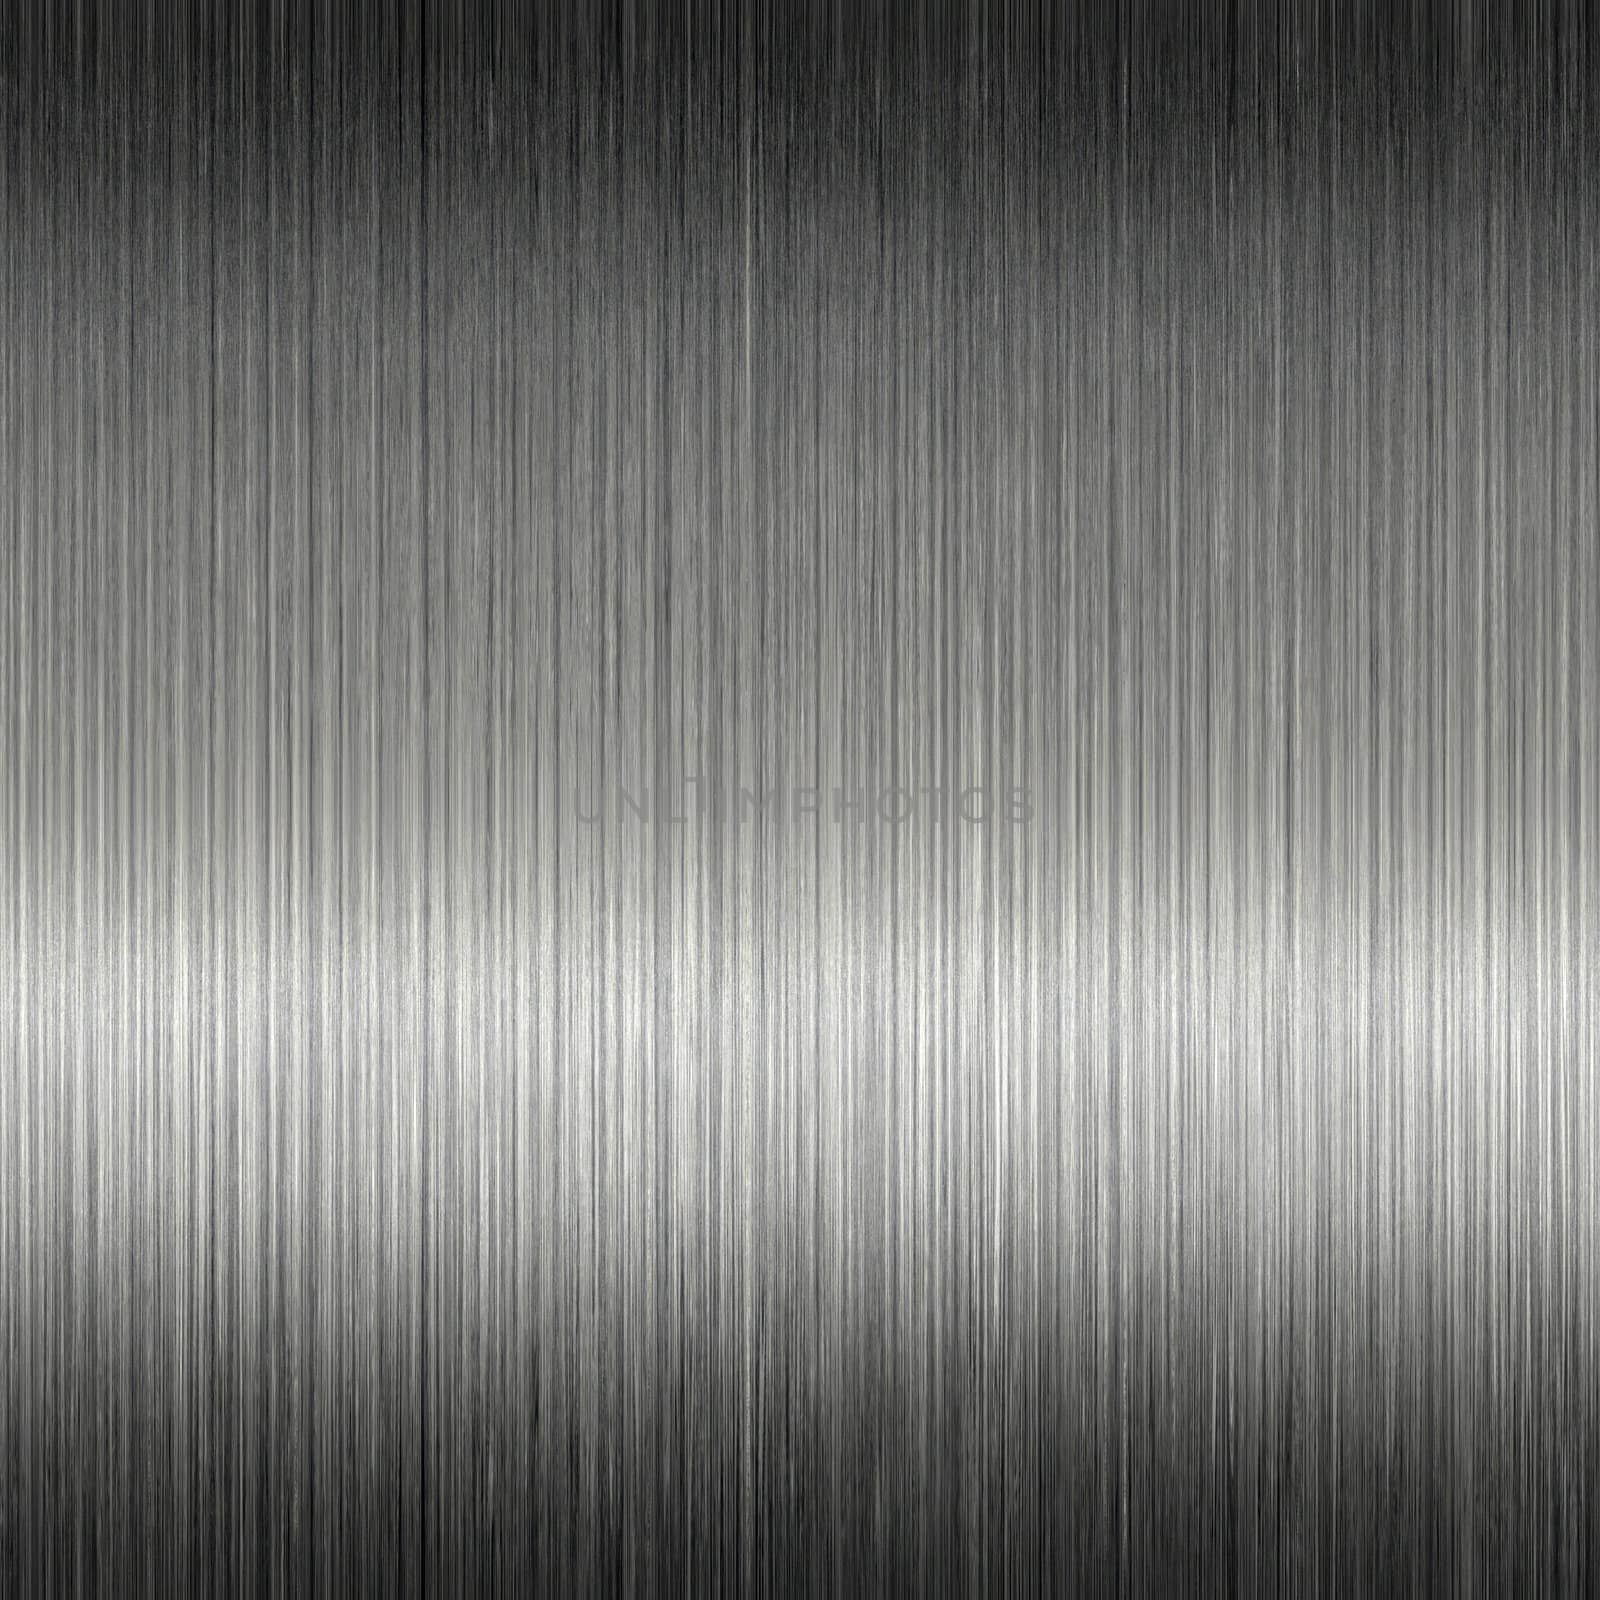 Natural looking dark brushed aluminum texture that works great as a background.